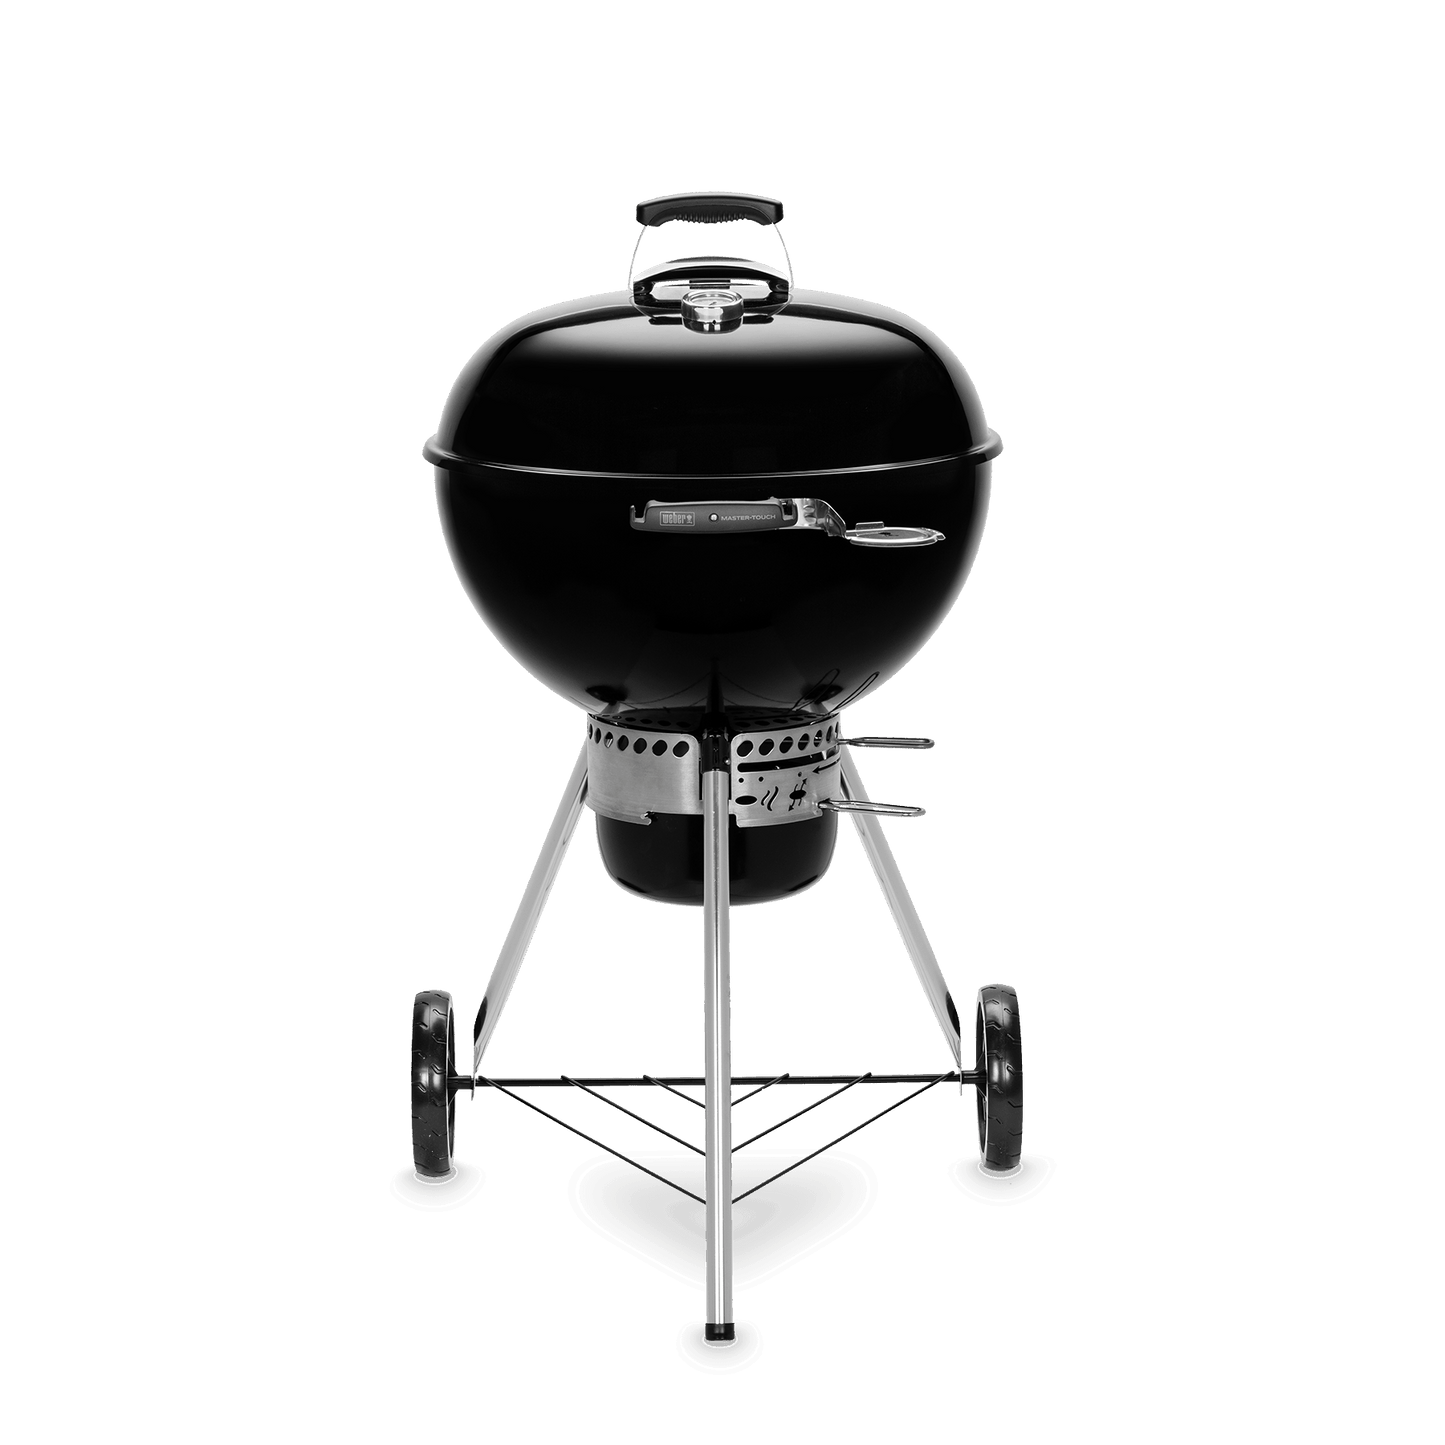 Weber 57cm Master Touch Plus Kettle GBS Grill